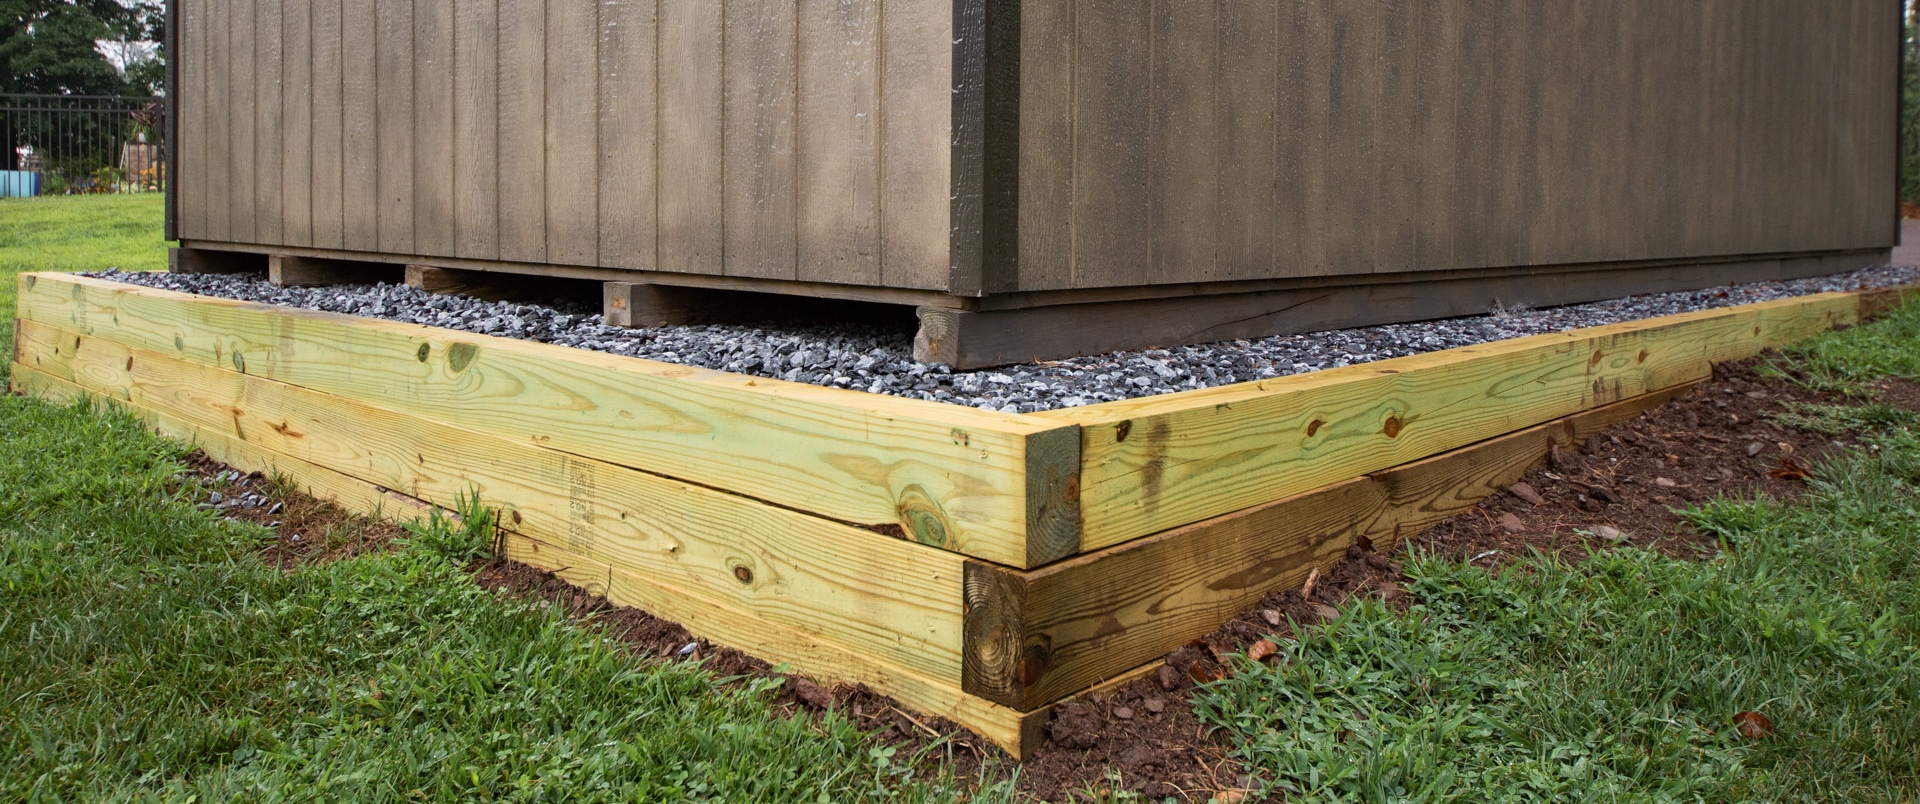 Shed Foundations The 13 Top Options